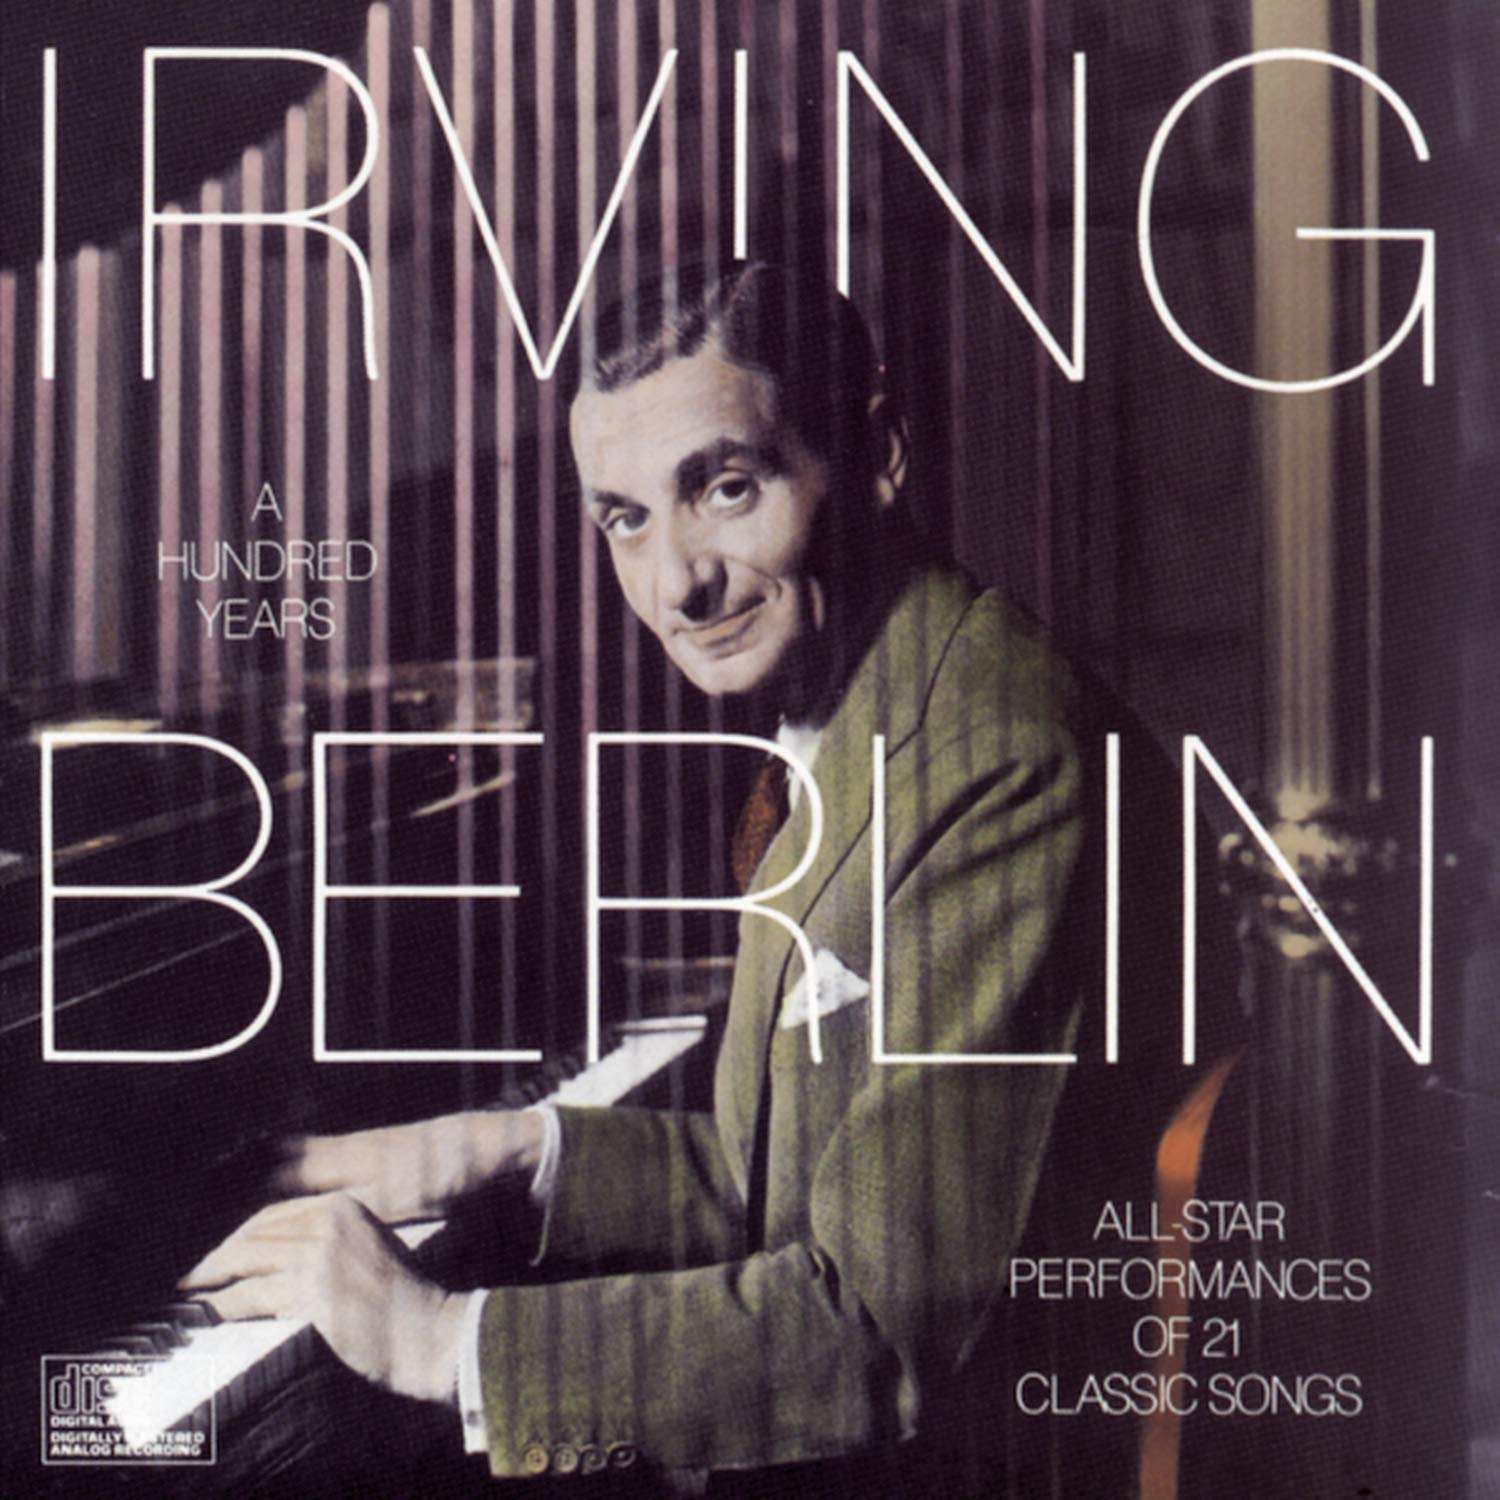 From Tin Pan Alley to Icon: Celebrating Irving Berlin